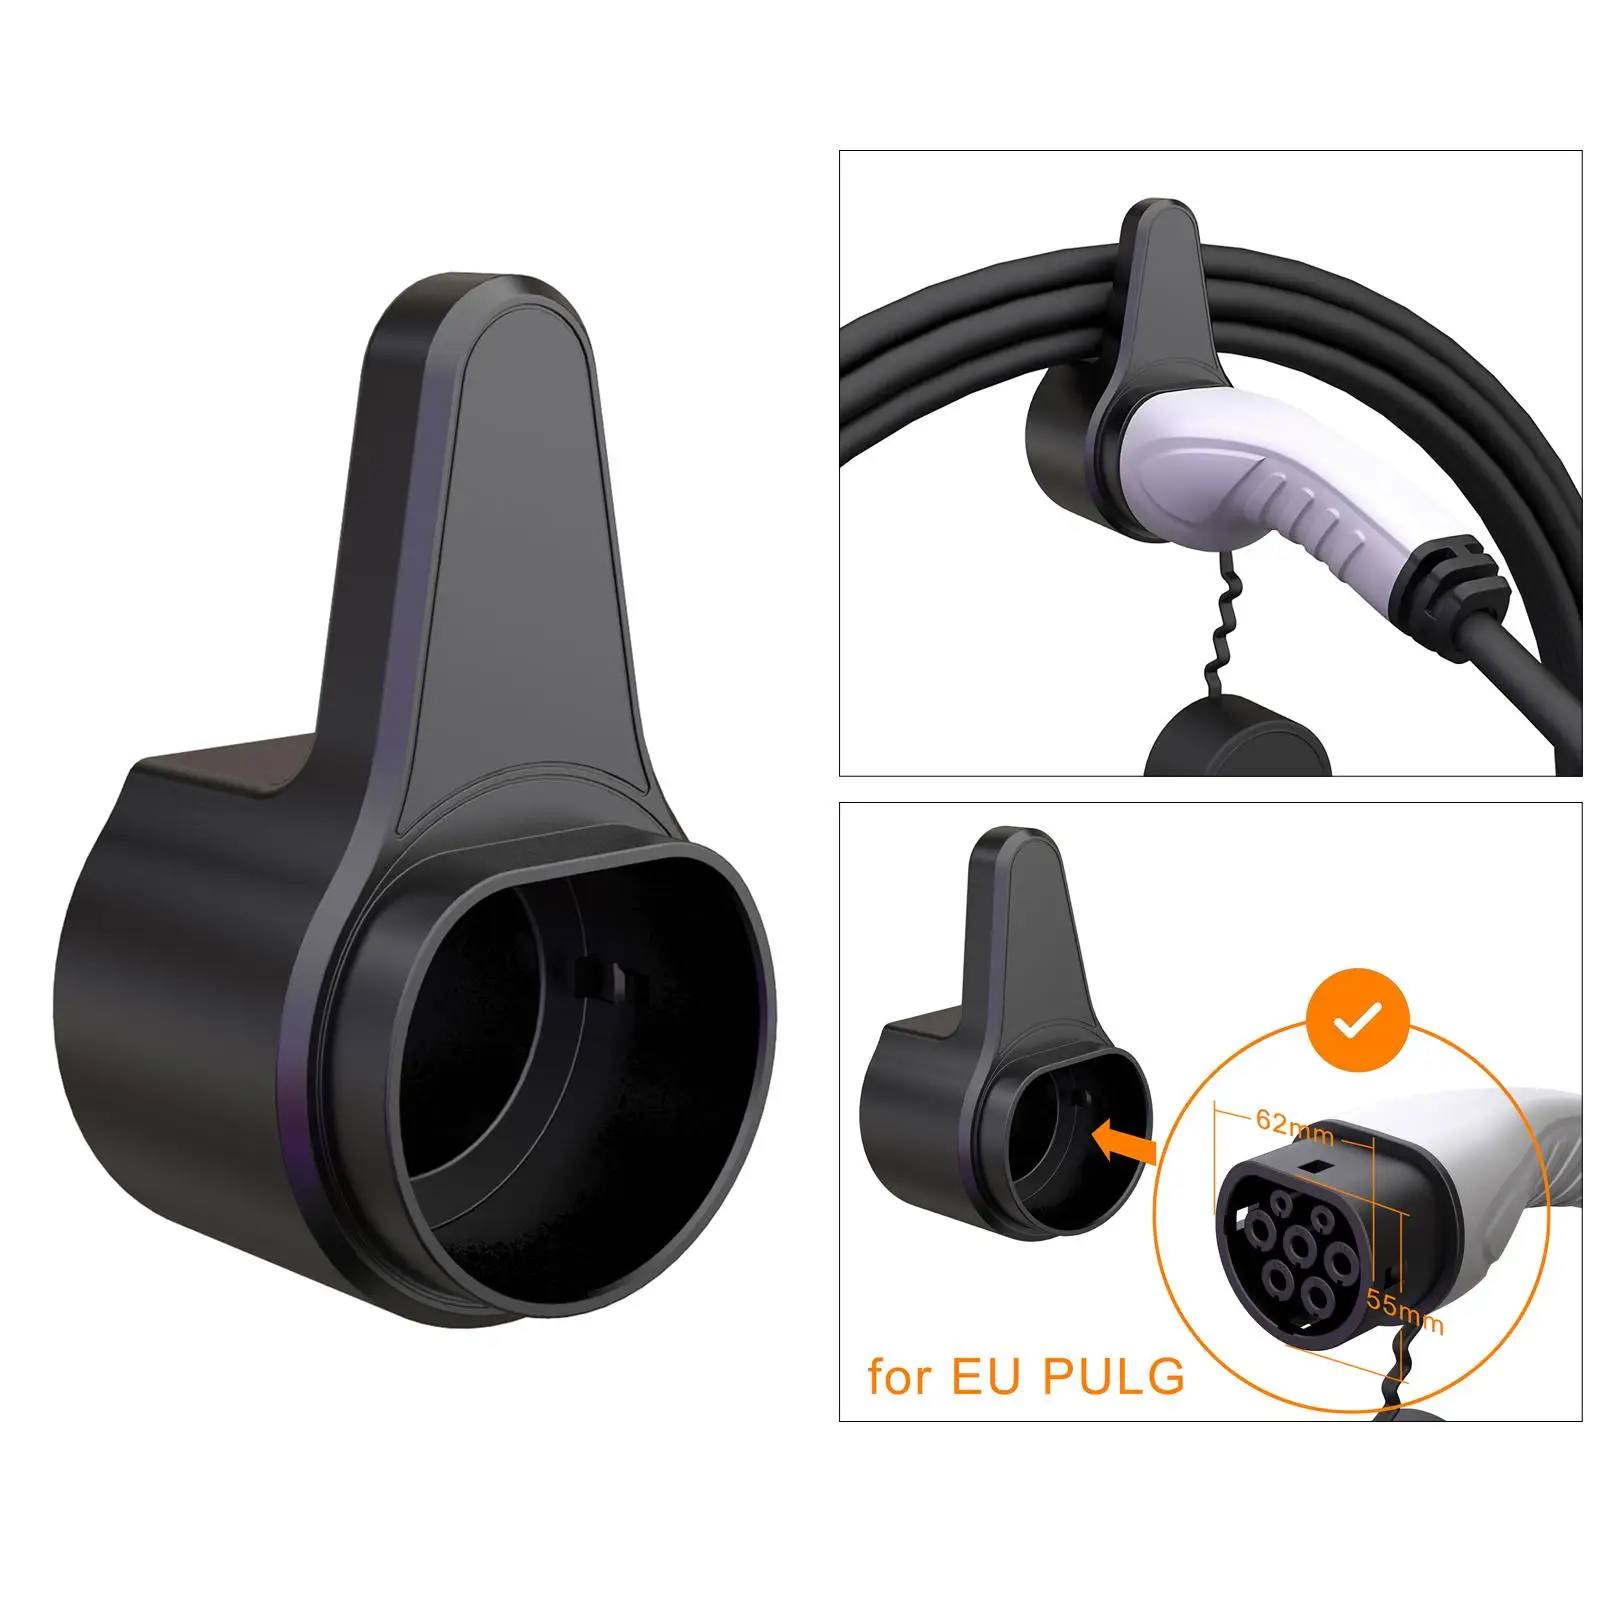 Sturdy Holder Dock Electric Vehicle Type 2 Charging Cable Extra Protection Leading ABS EU Plug